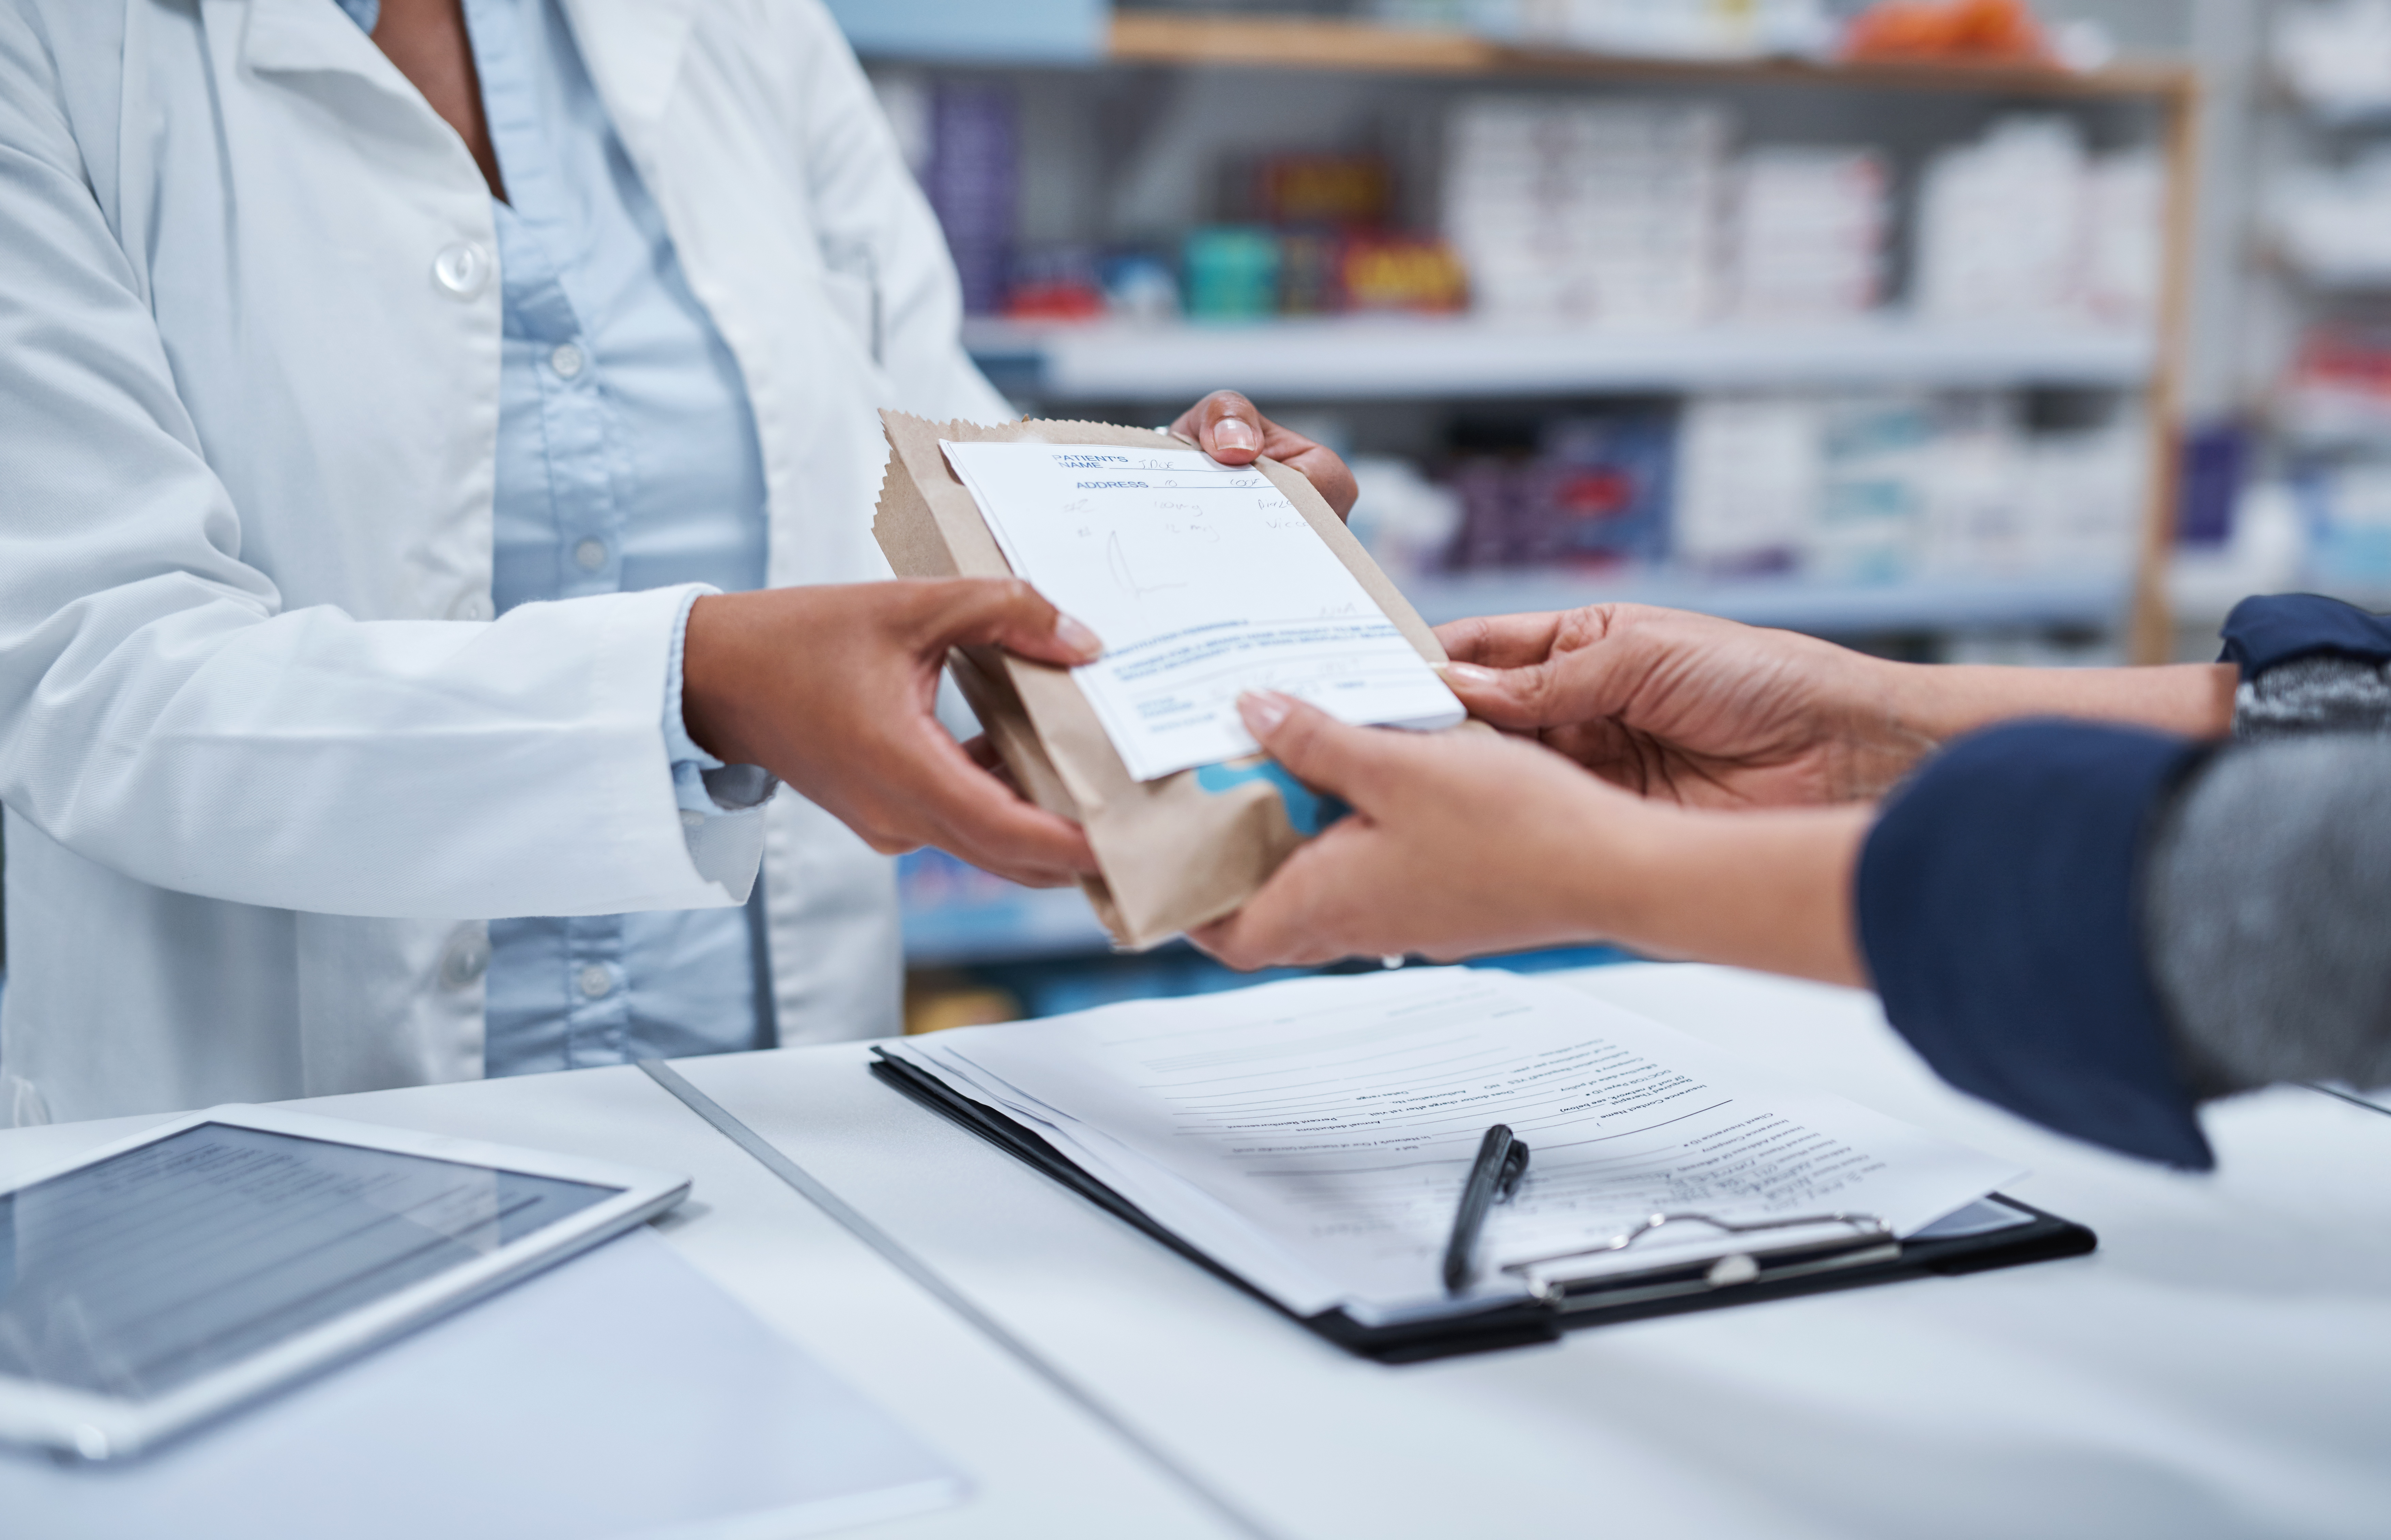 A pharmacist hands over a prescription in a brown bag